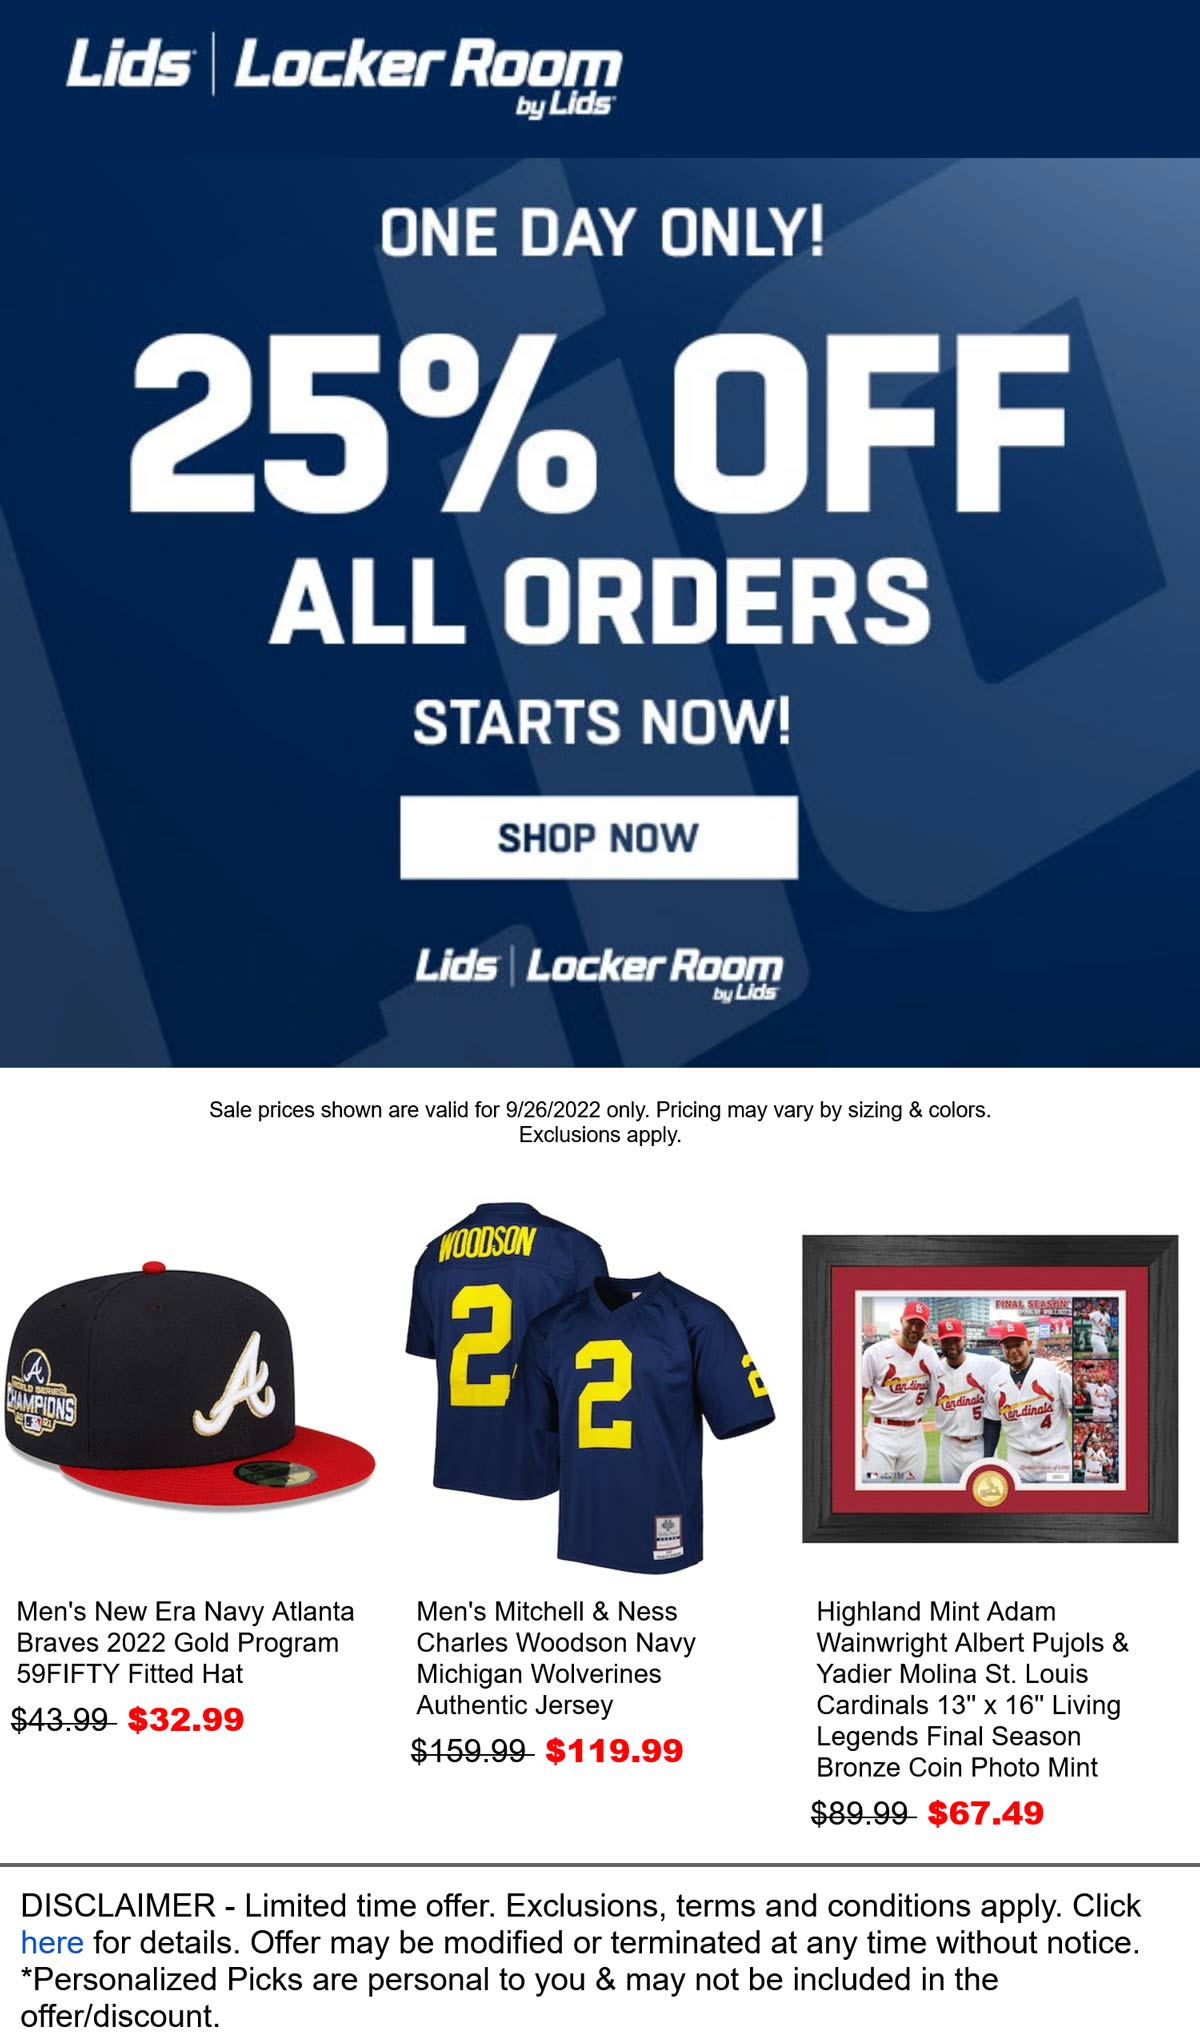 Lids coupons & promo code for [December 2022]